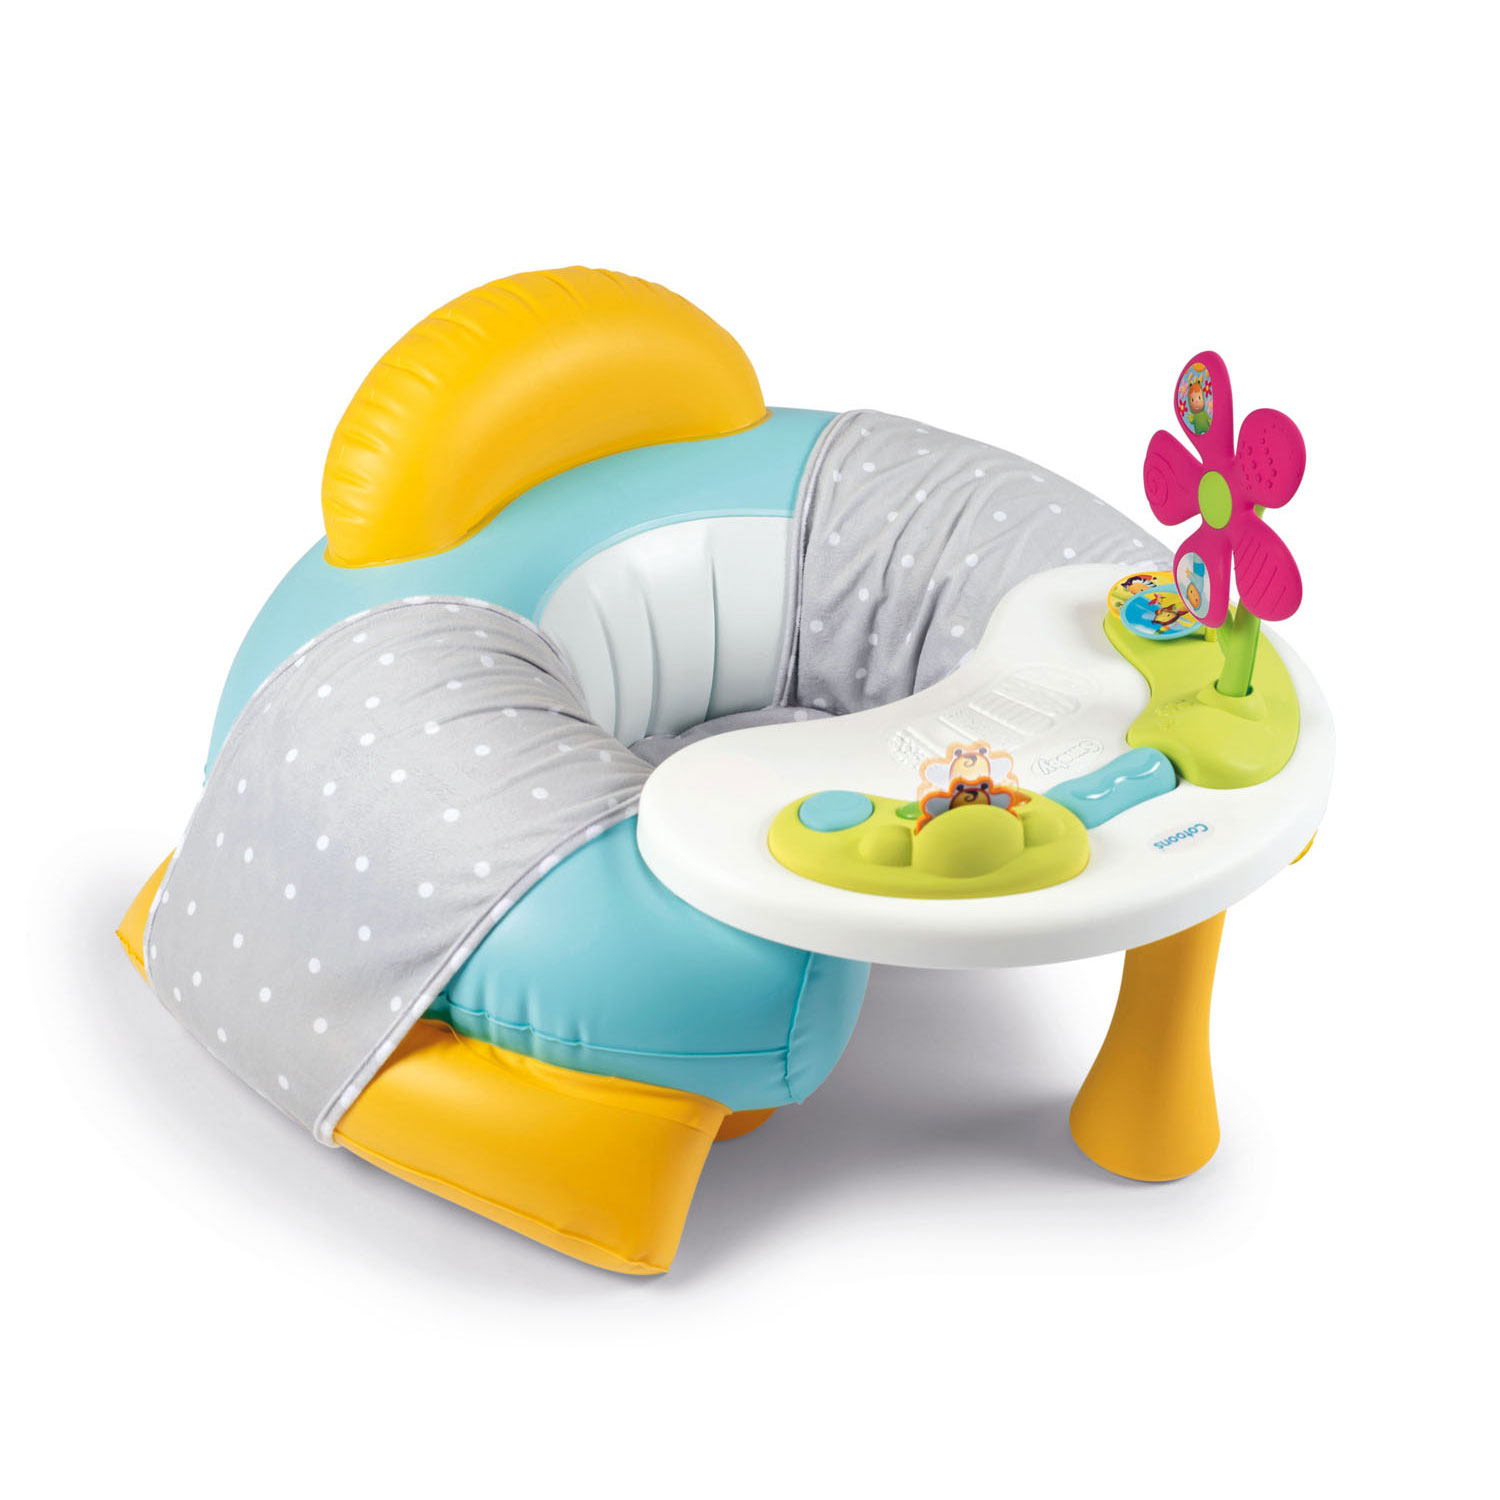 binnen Petulance verslag doen van Smoby Cotoons Baby chair with Activity table | Thimble Toys